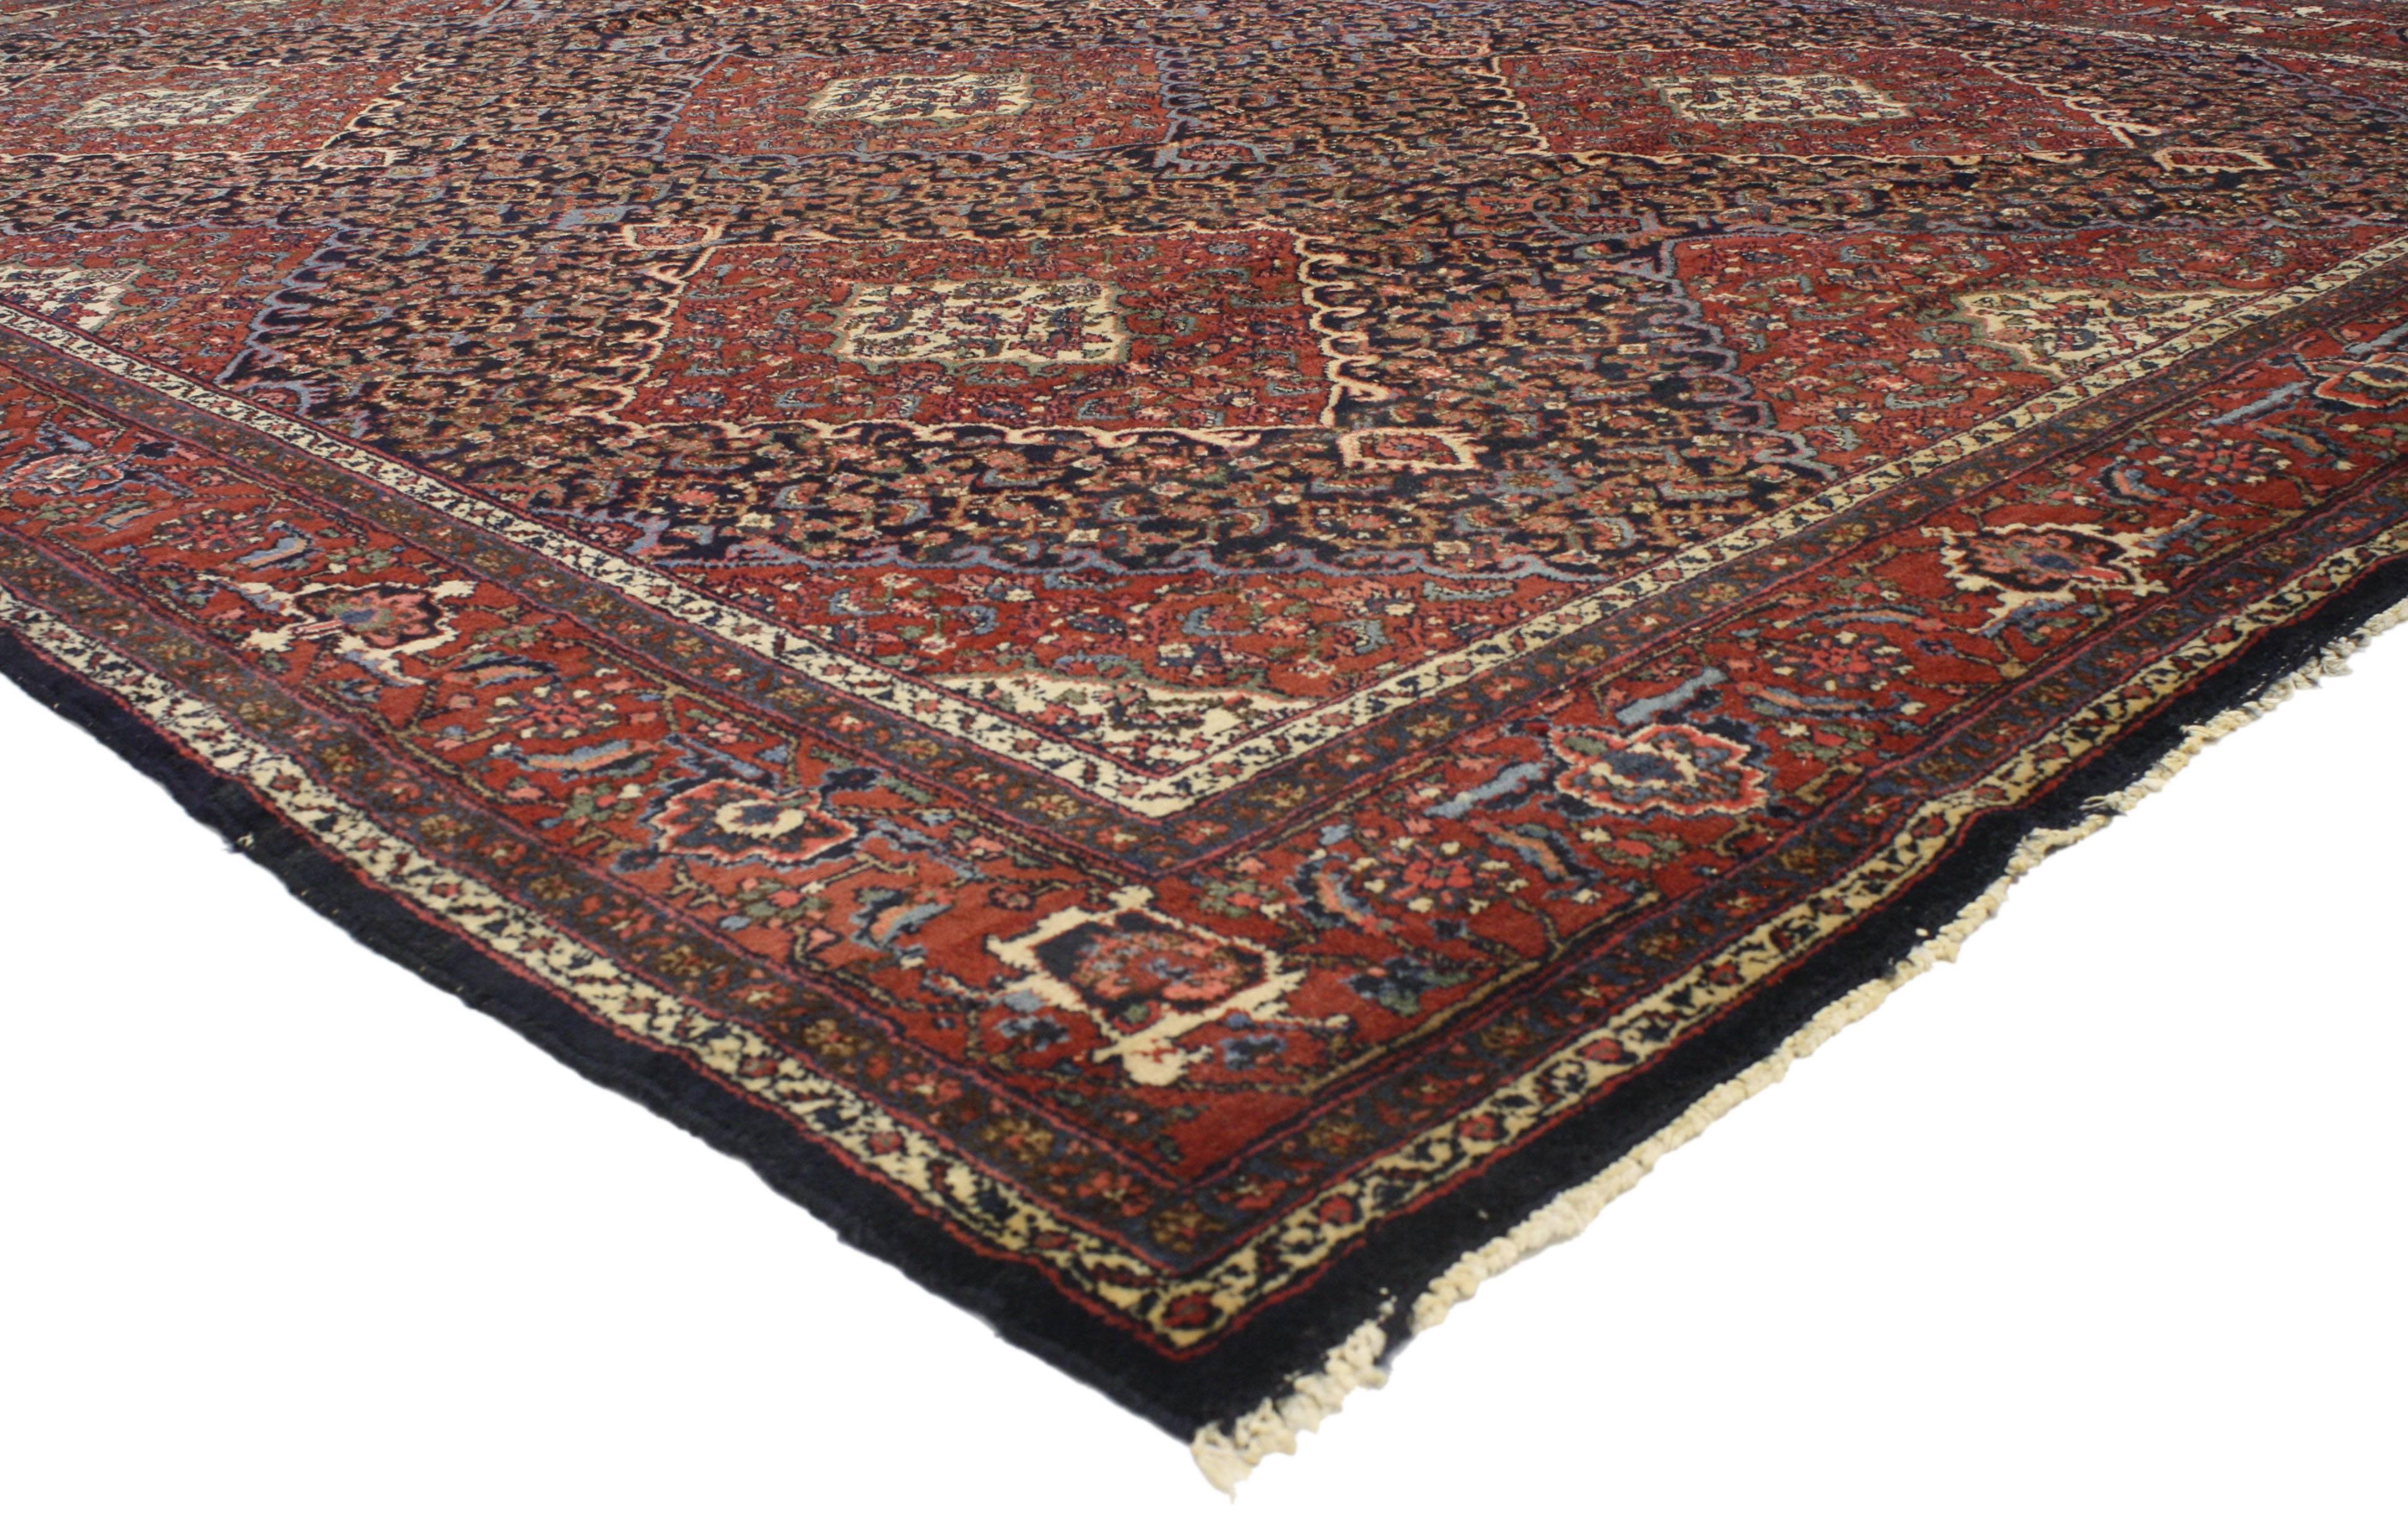 77019 antique Persian Bibikabad rug with modern traditional style. Rich in color combined with complexity, this antique Persian Bibikabad rug with modern traditional style defines refinement on all levels. Sophistication begins at the border